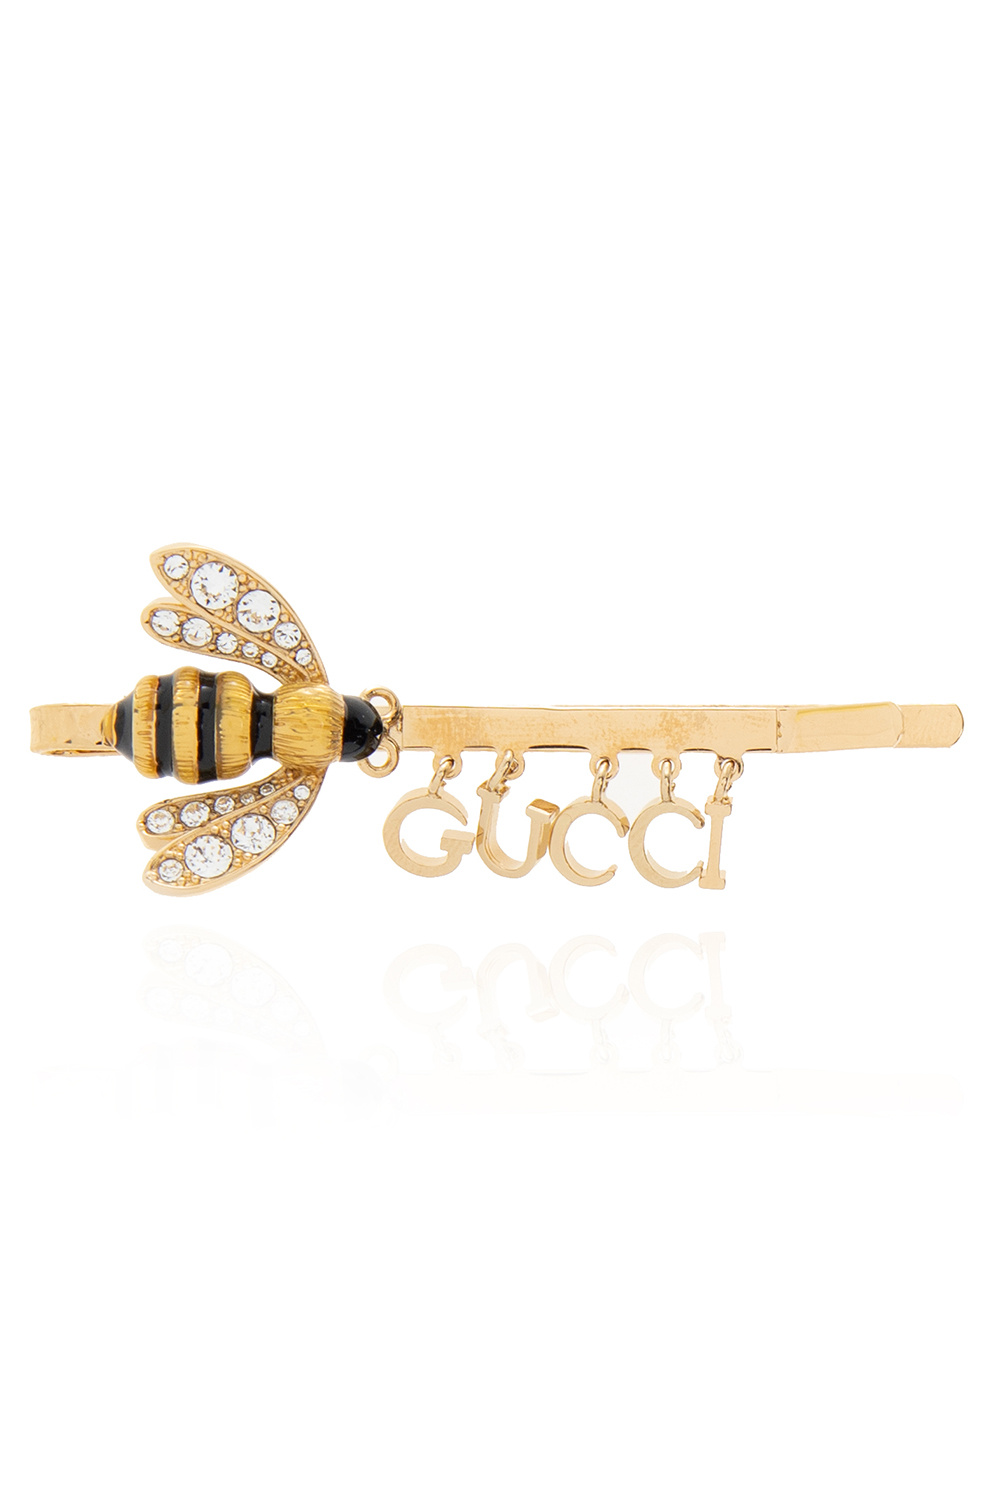 IetpShops Australia - gucci hair clips Gucci - as it s also offering major  deals on Gucci footwear